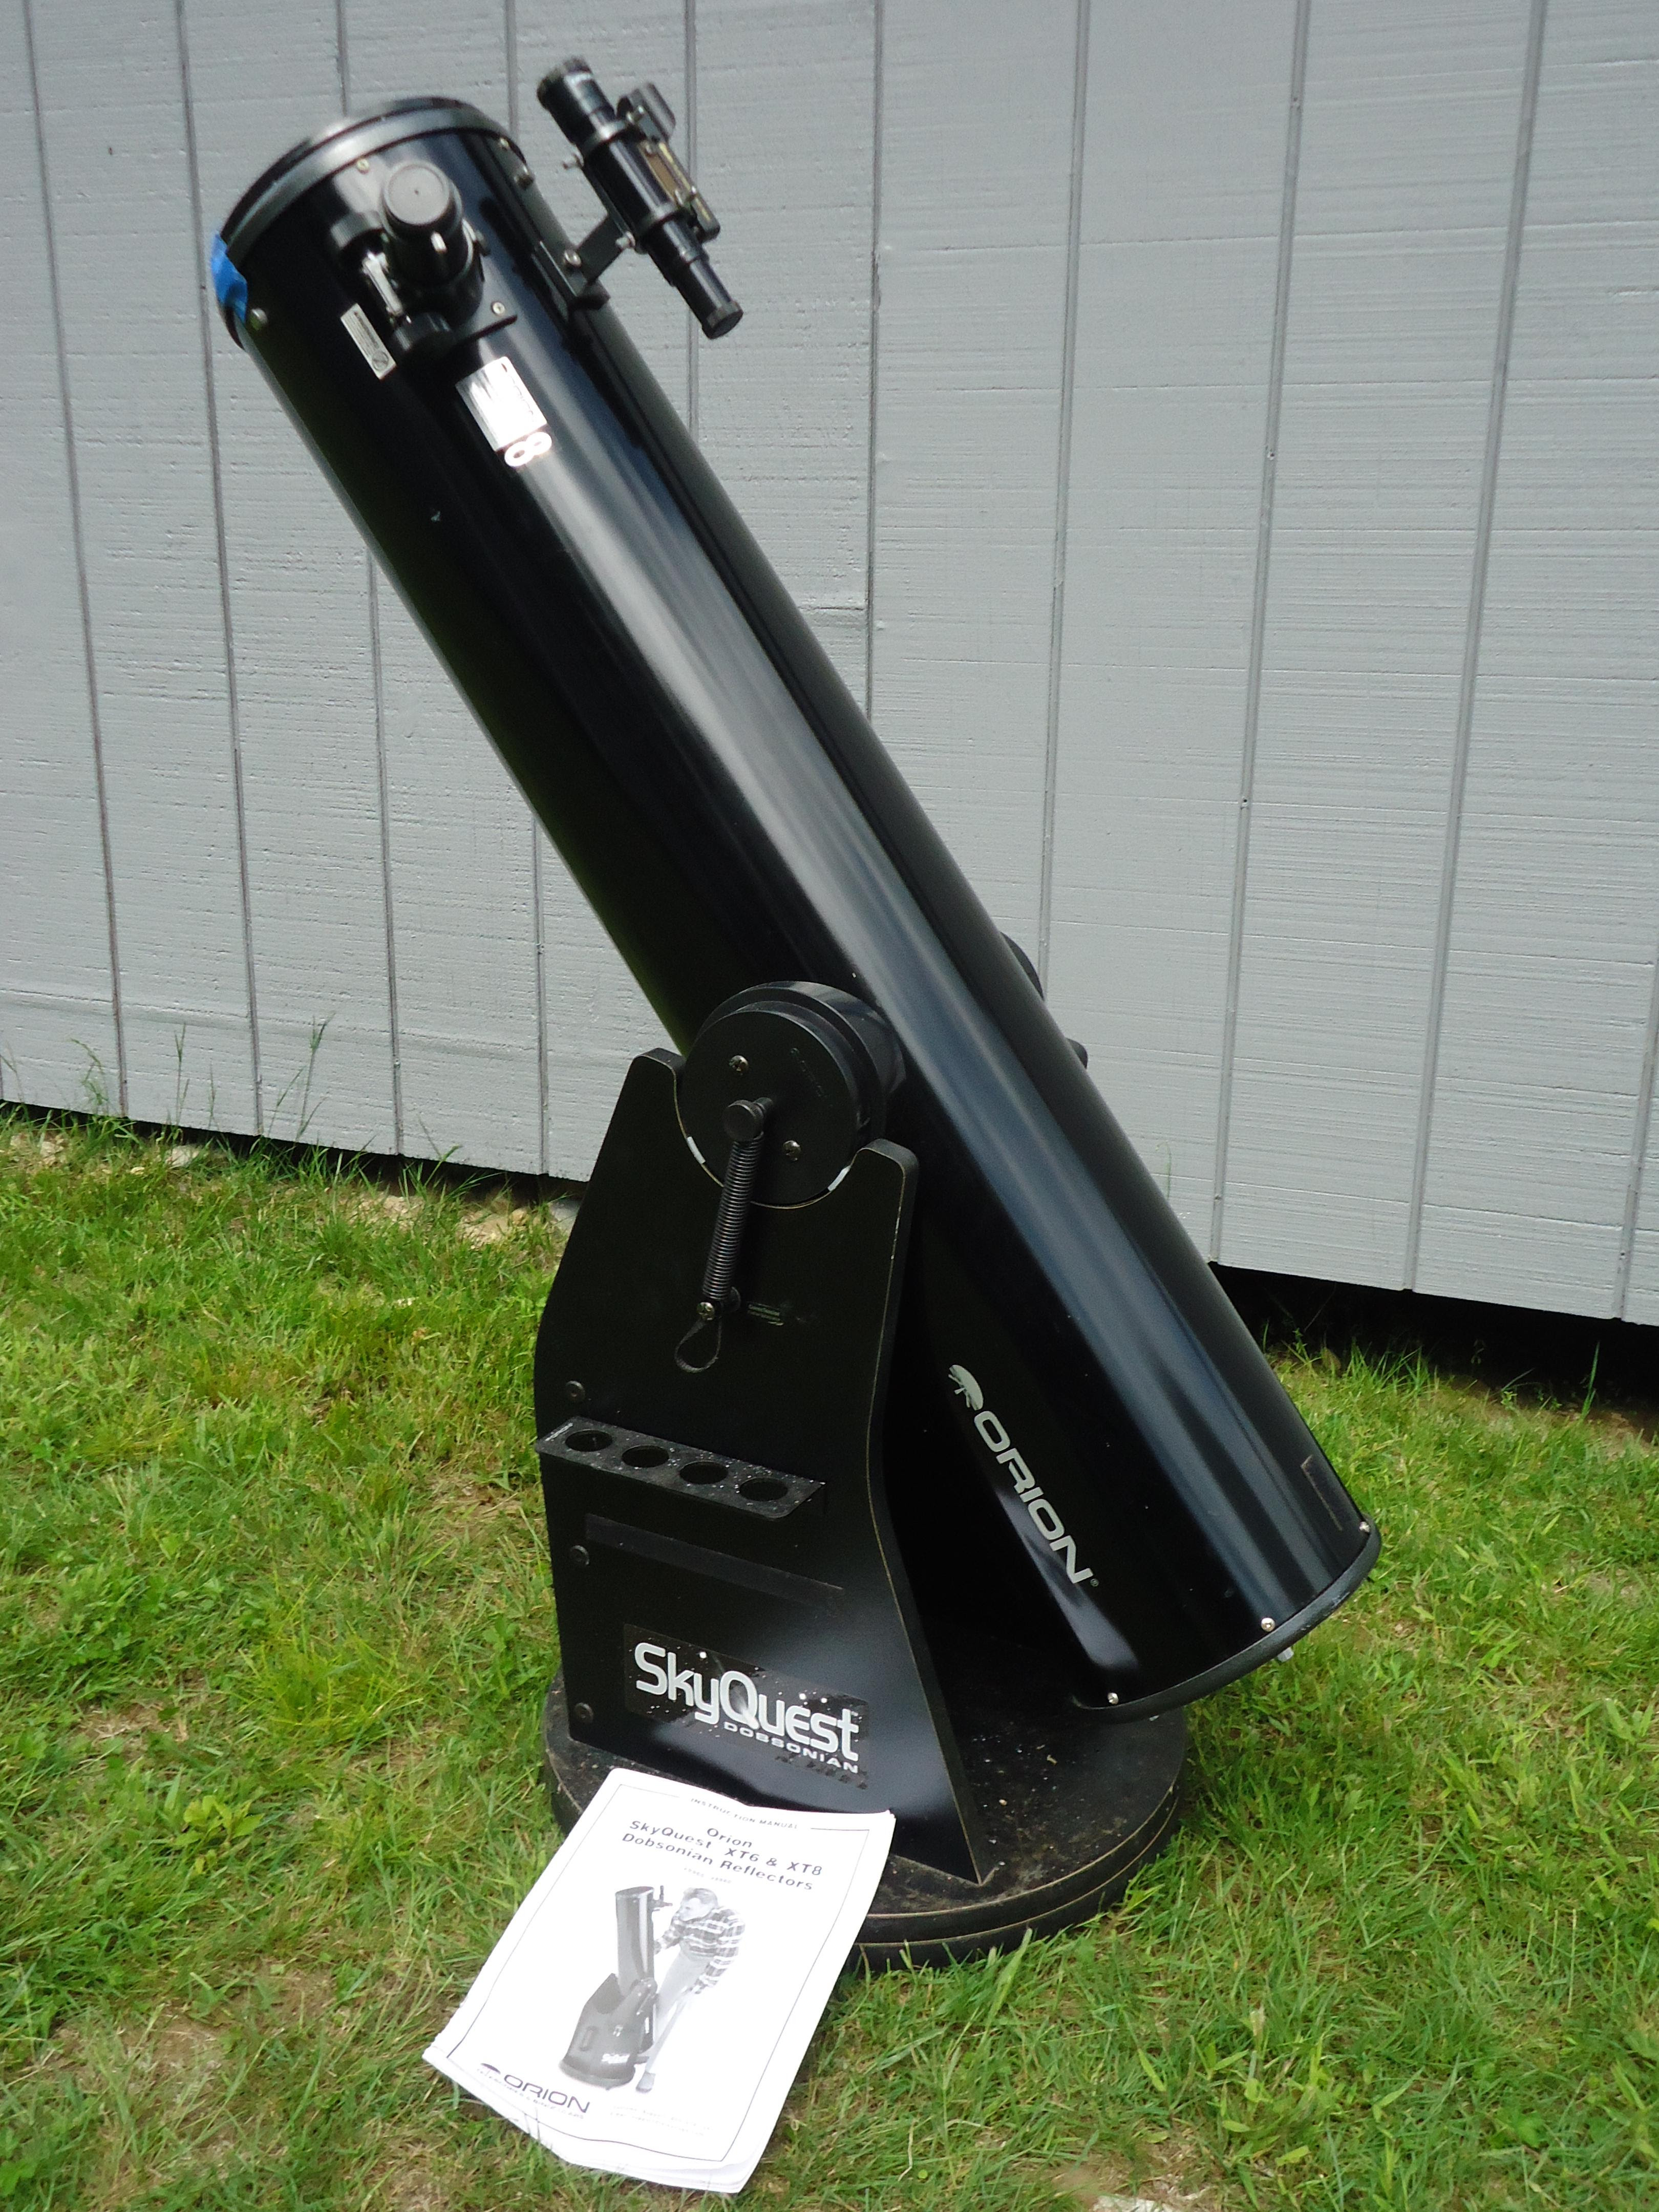 Orion SkyQuest 8-inch Dobsonian ReflectorOrion SkyQuest 8-inch Dobsonian Reflector